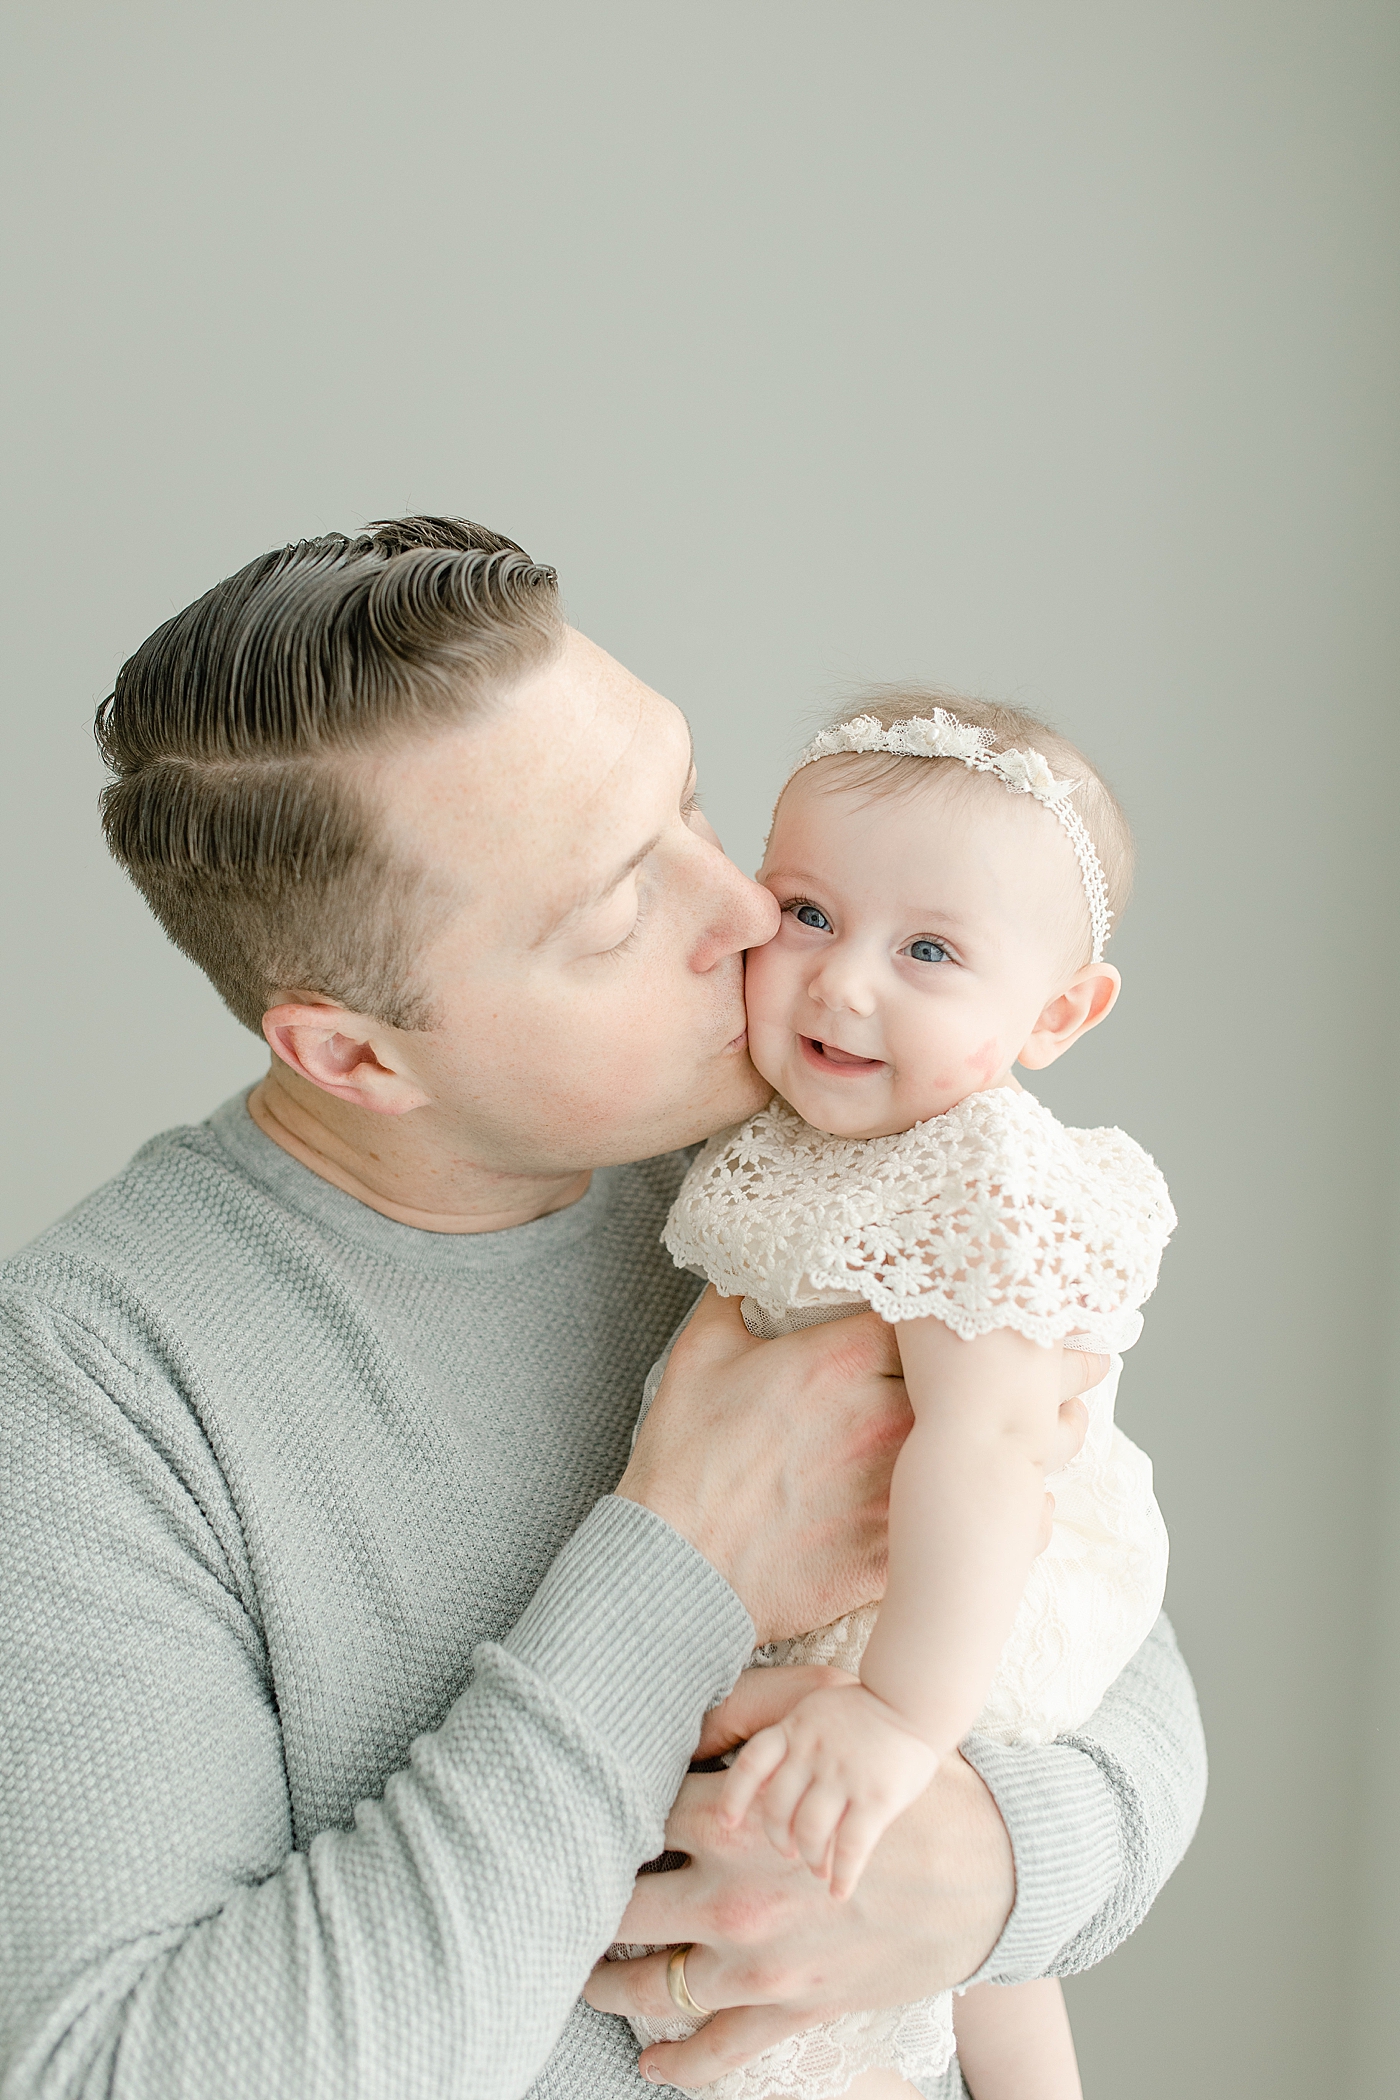 Dad kissing his baby girl on the cheek | Photo by Little Sunshine Photography